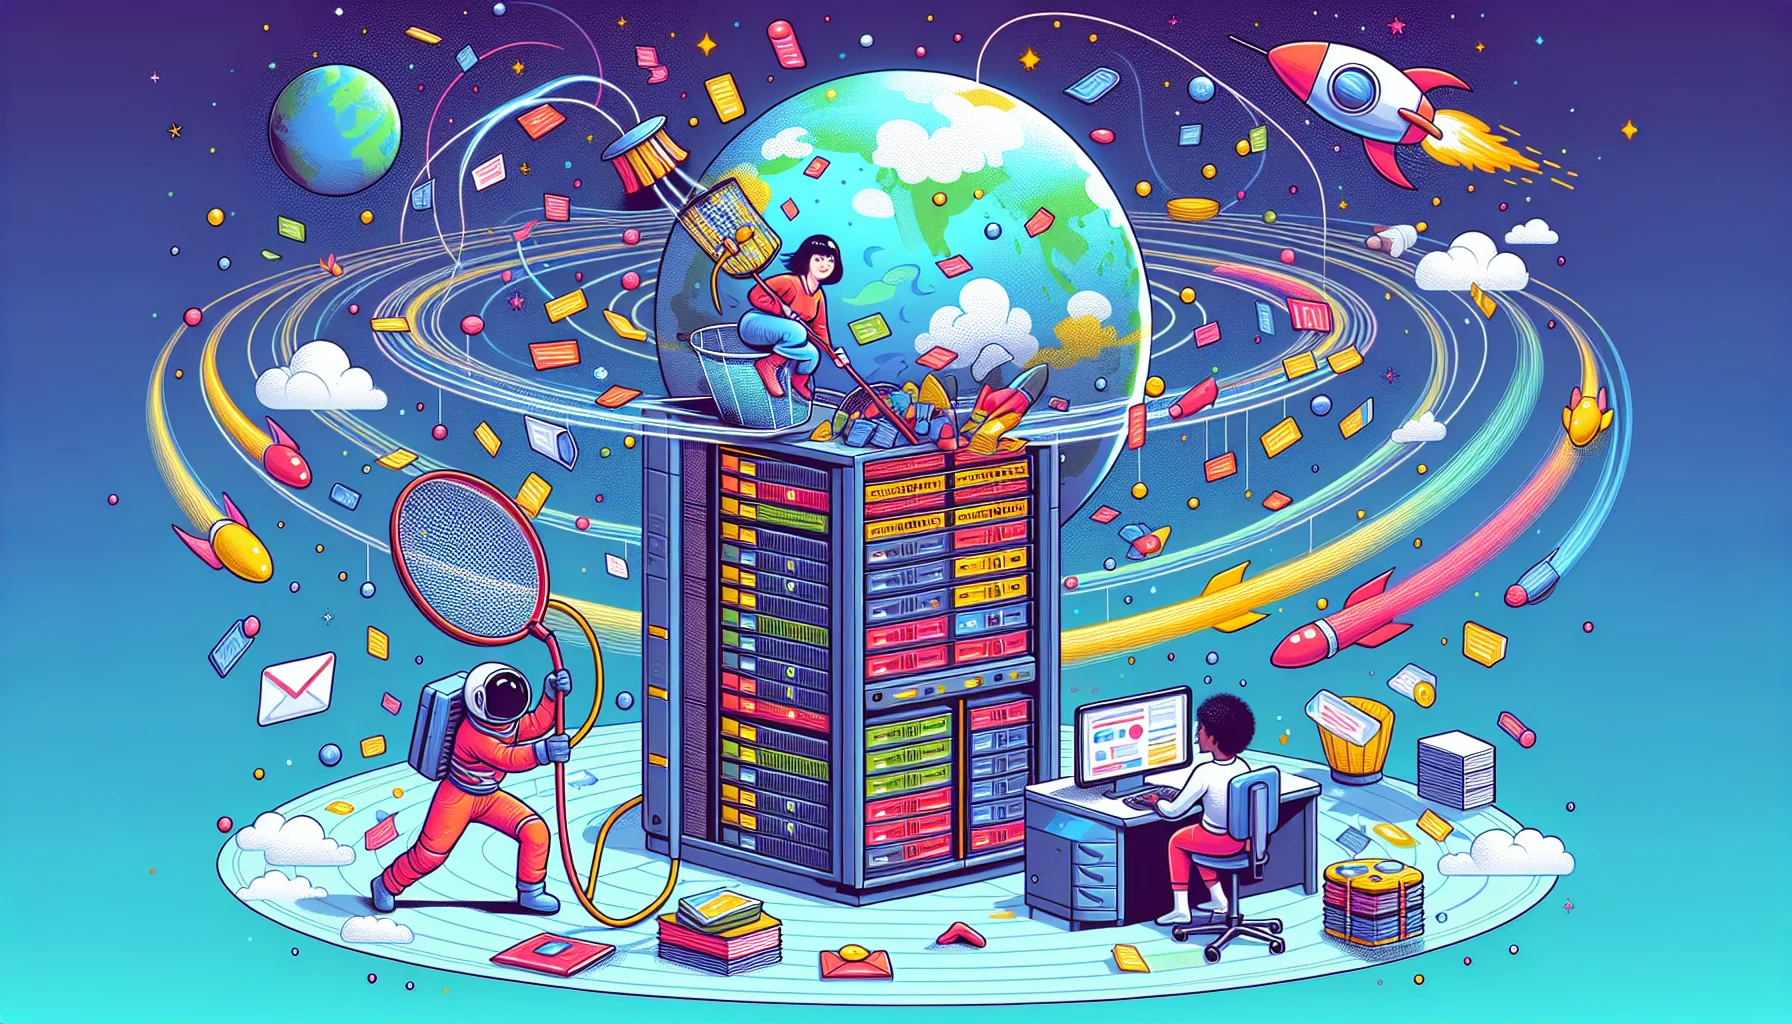 Create a detailed and humorous illustration of what web hosting is. Visualize a server shaped like a small planet in the middle of space, with colorful data and files rocketing around in its orbit. In the scene, there's also an East Asian female astronaut holding a large net attempting to catch some of the data for her website. On the planet server, a Black male operator sits behind a large control desk, juggling numerous incoming and outgoing data packets. Use vibrant colors and playful, imaginative context to portray the functions of web hosting in a fun light.